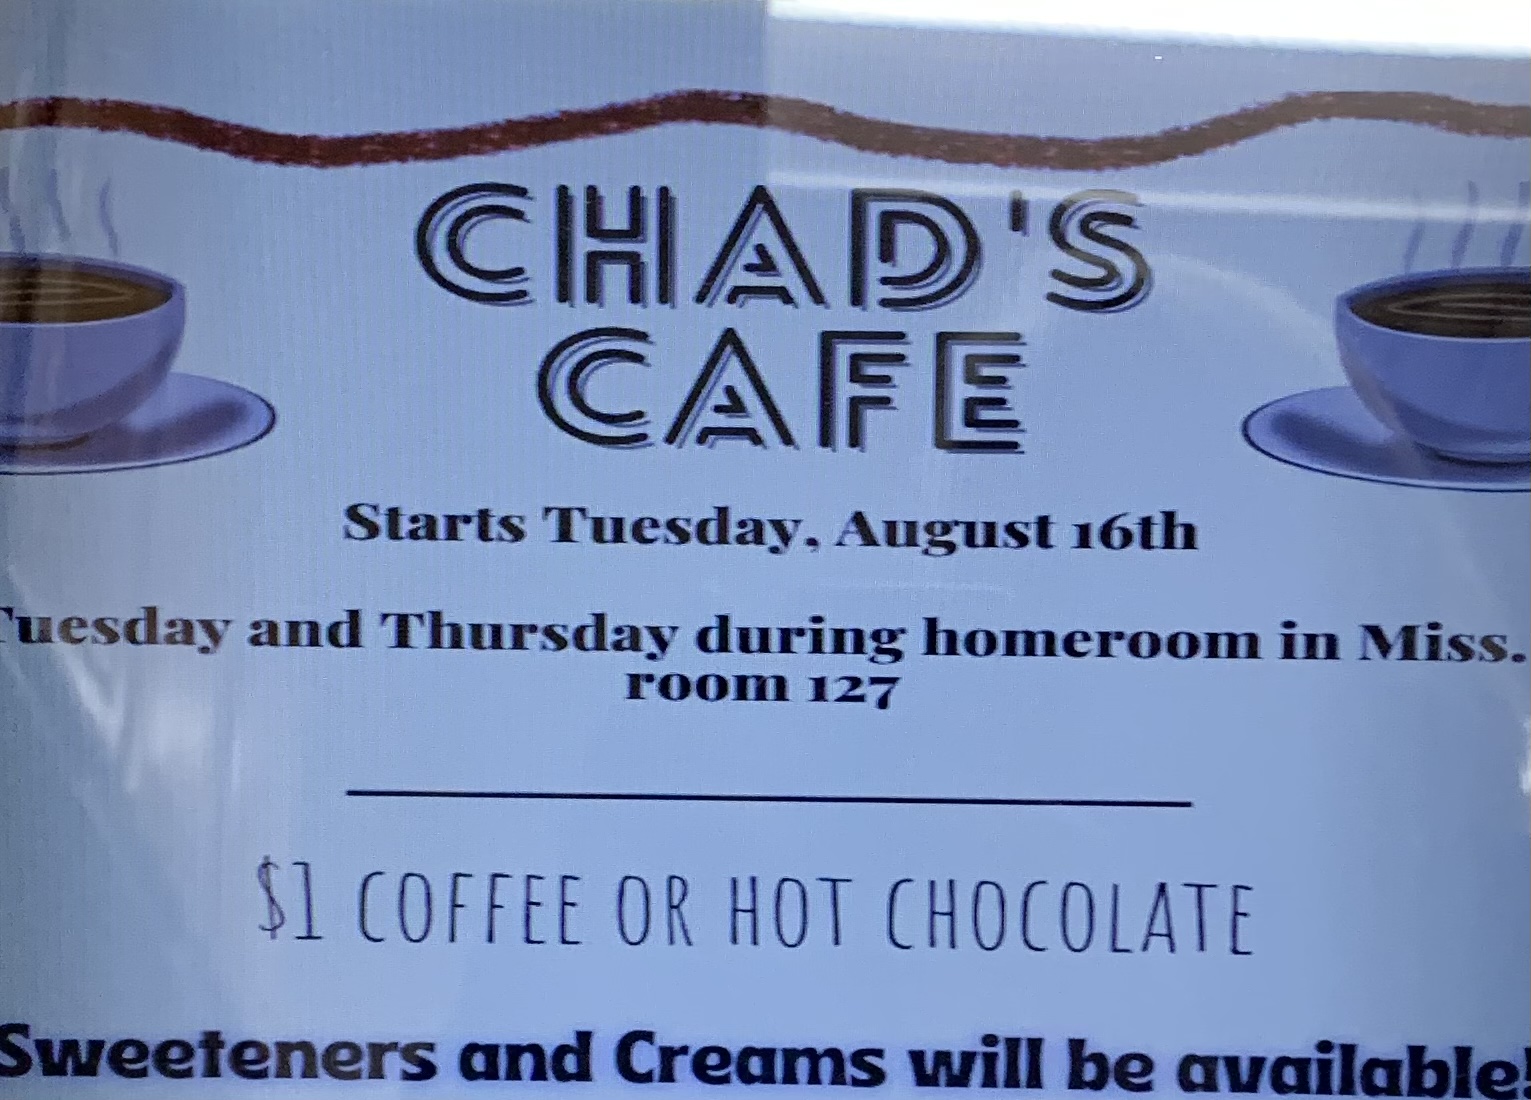 Chad’s Cafe